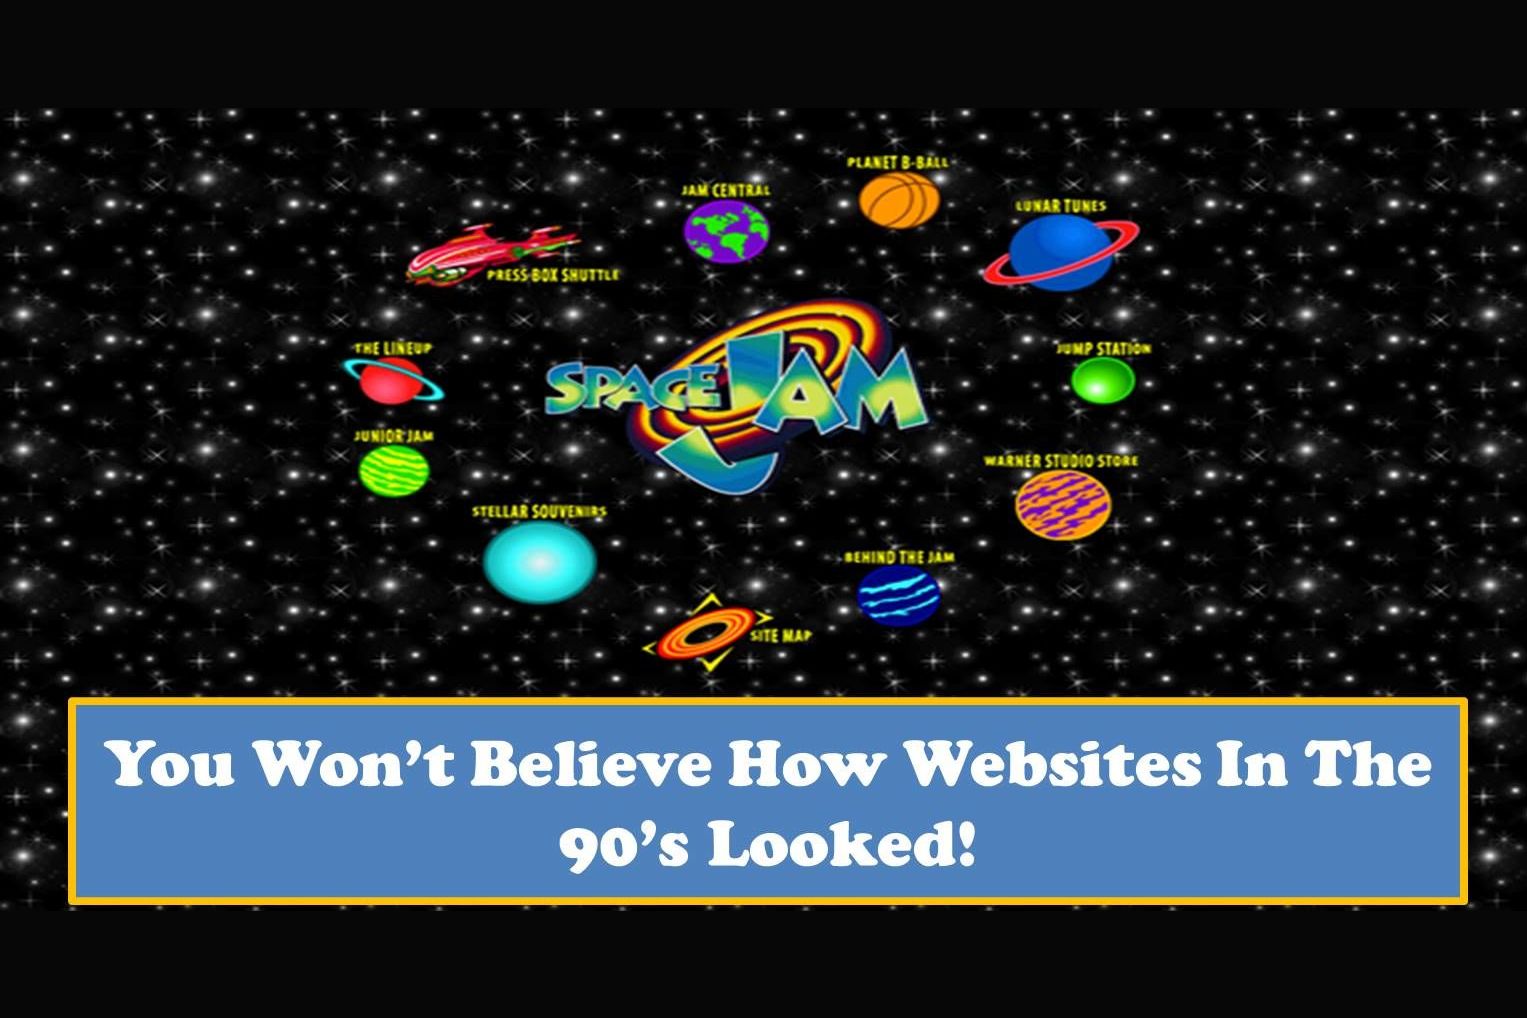 21 Screenshots Of Websites From The 90s That Will Give You All The